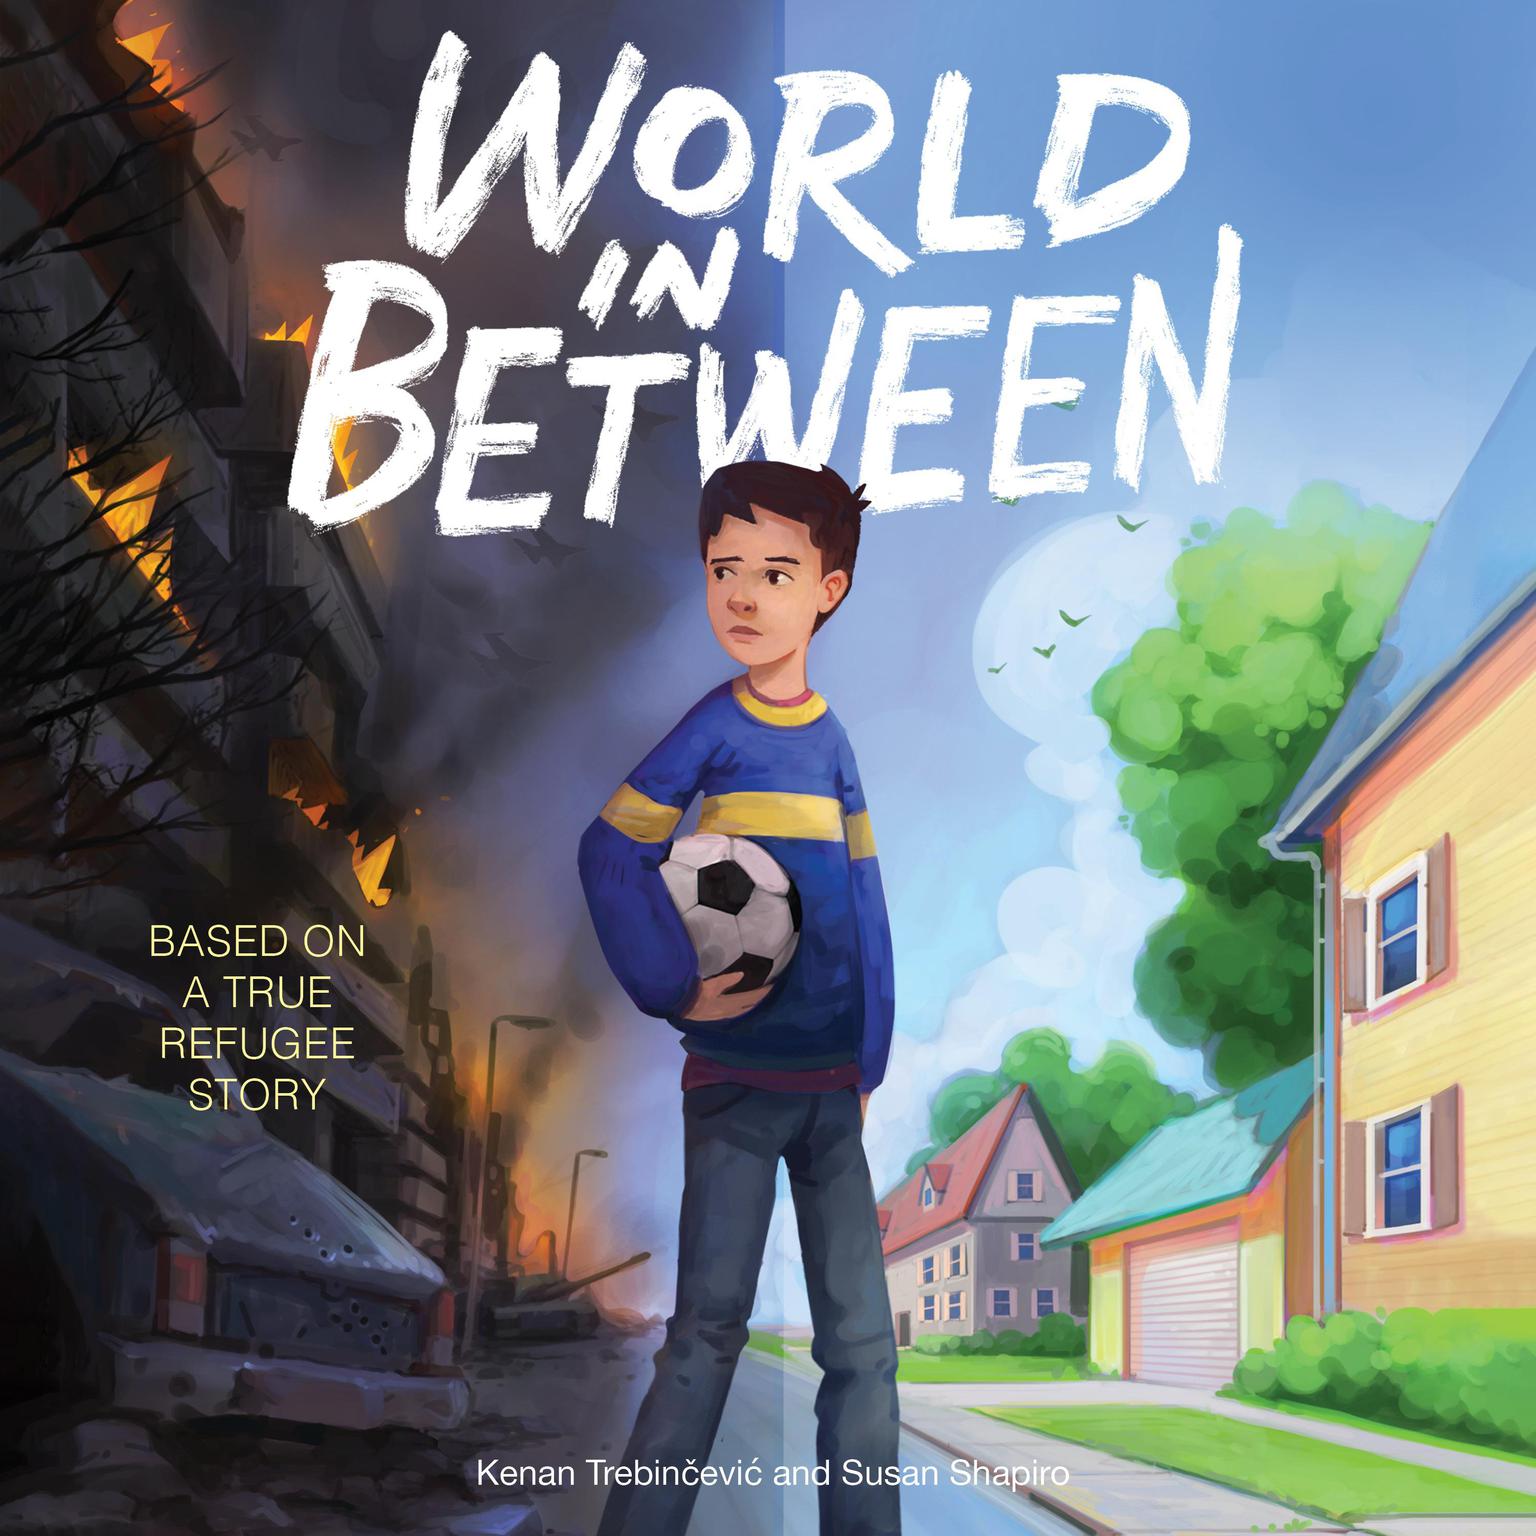 World in Between: Based on a True Refugee Story Audiobook, by Kenan Trebincevic